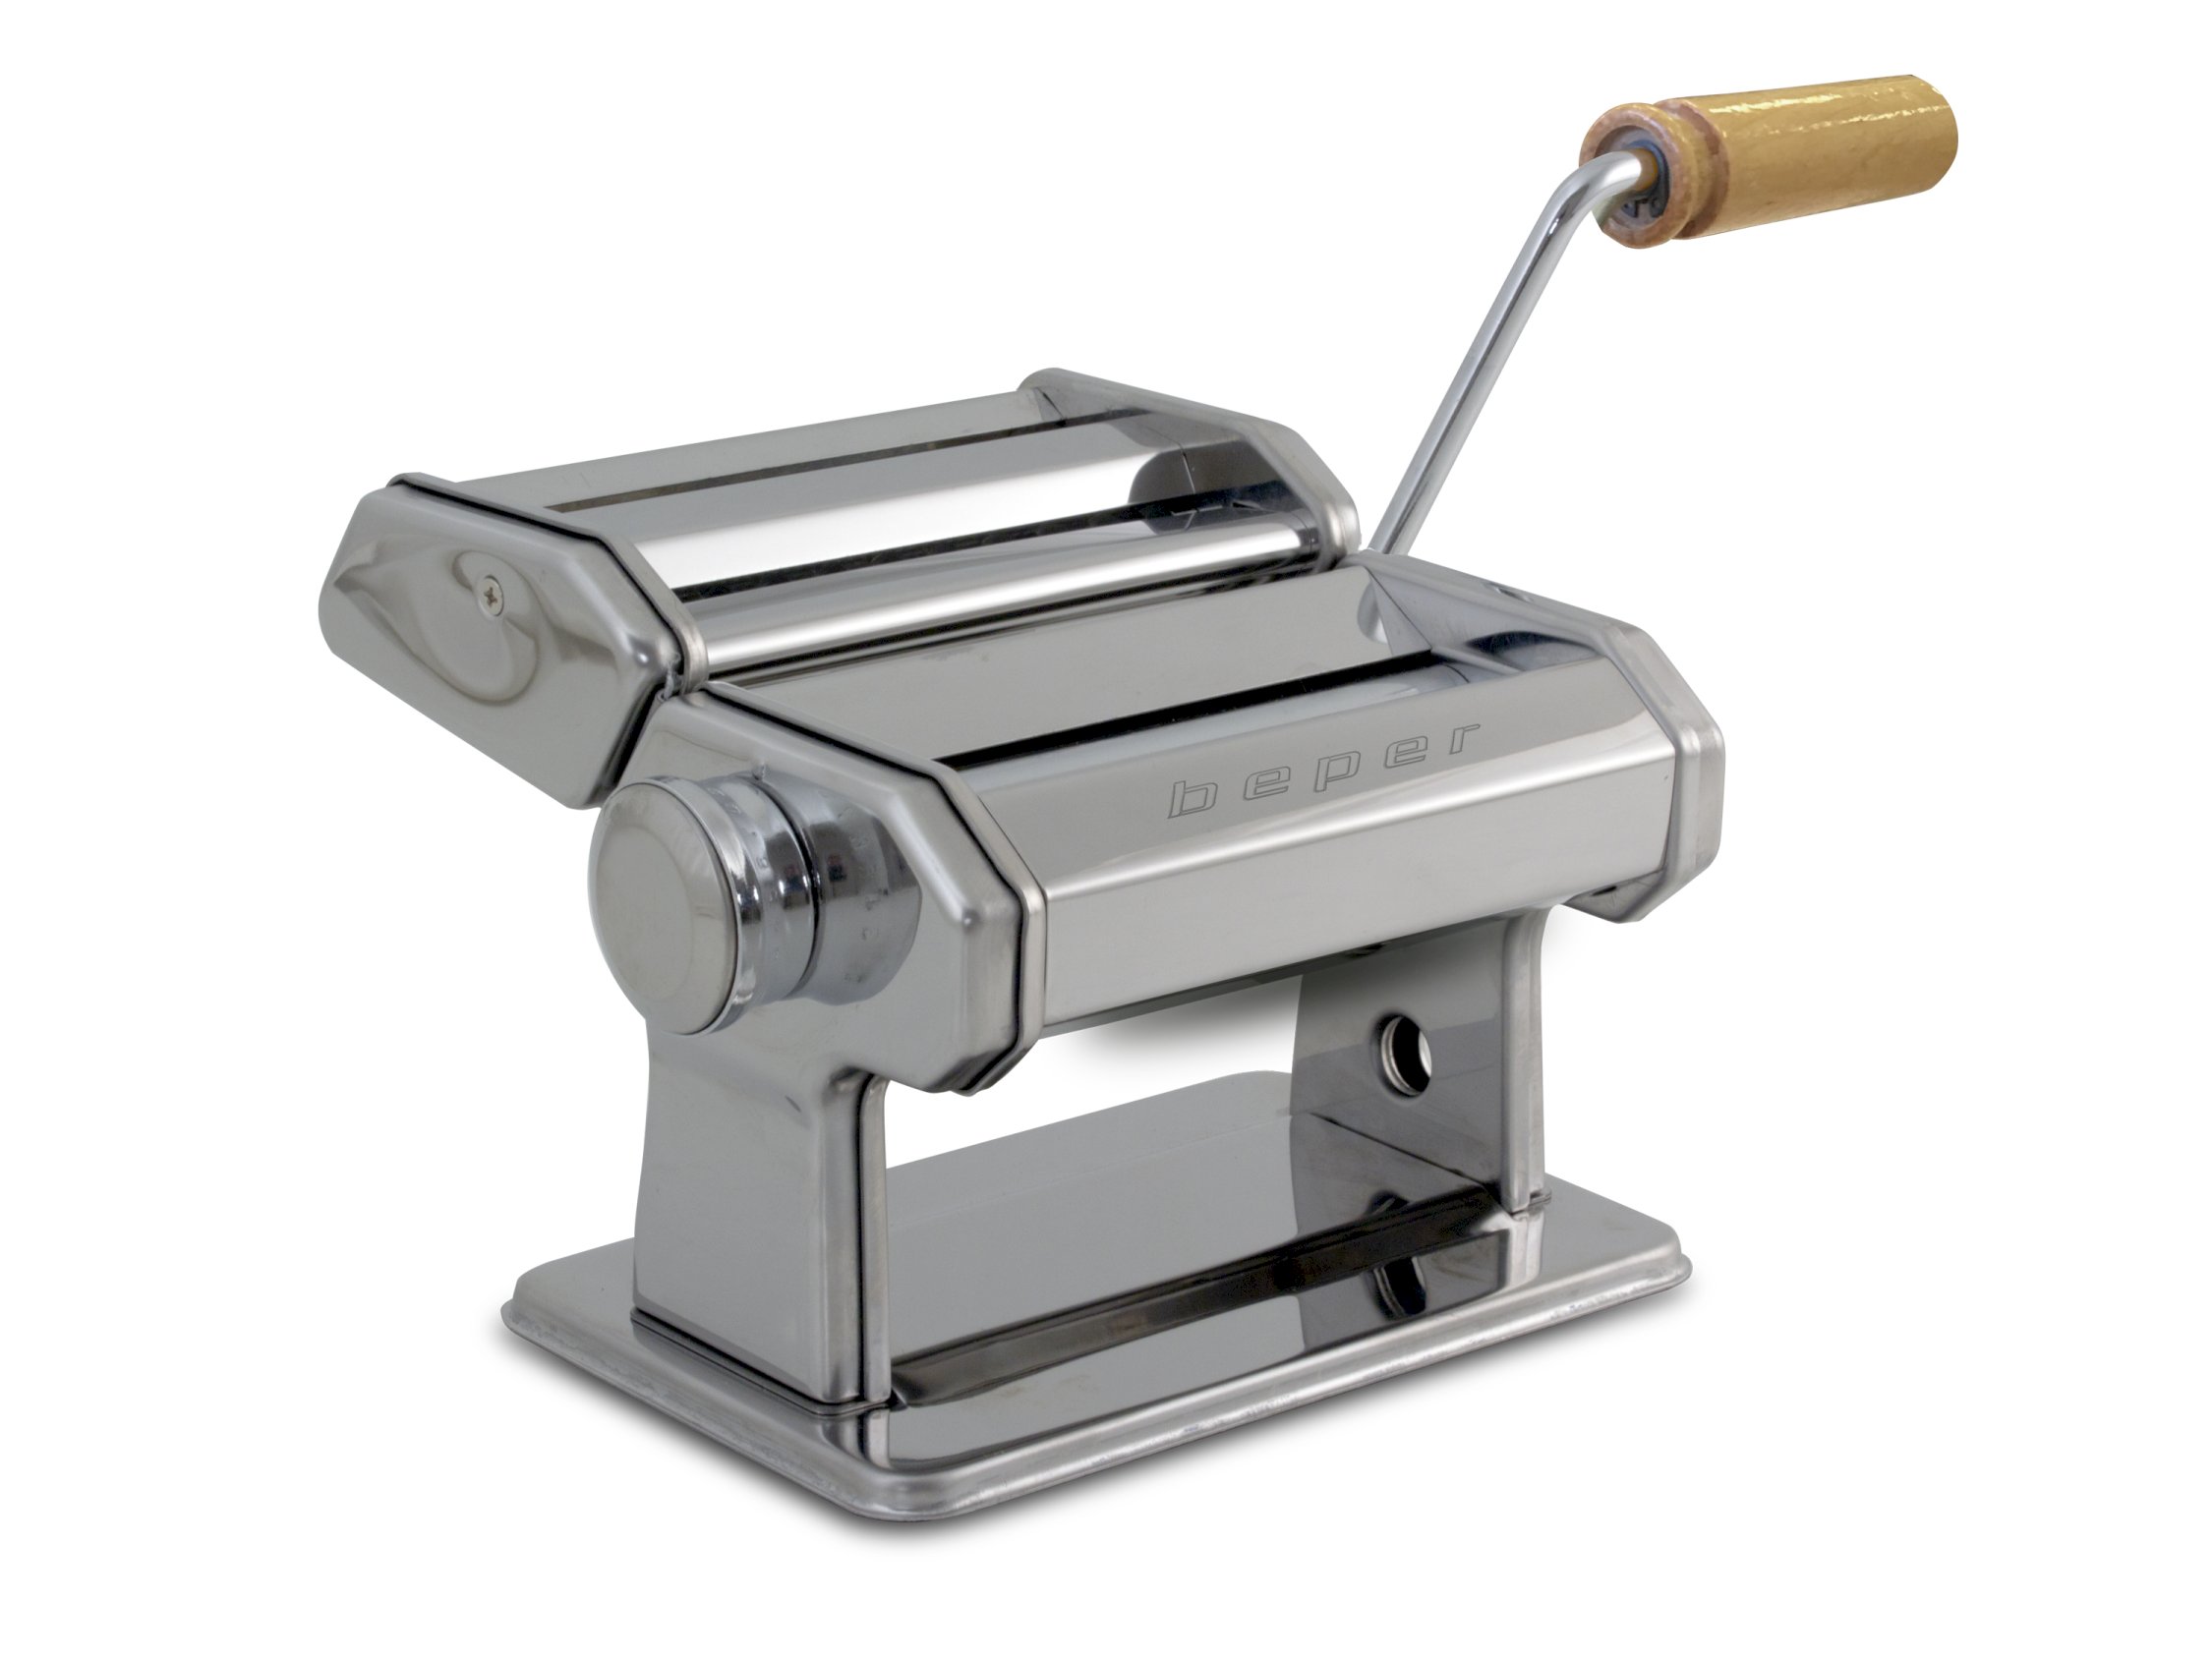 MD.500, manual pasta machine, stainless steel